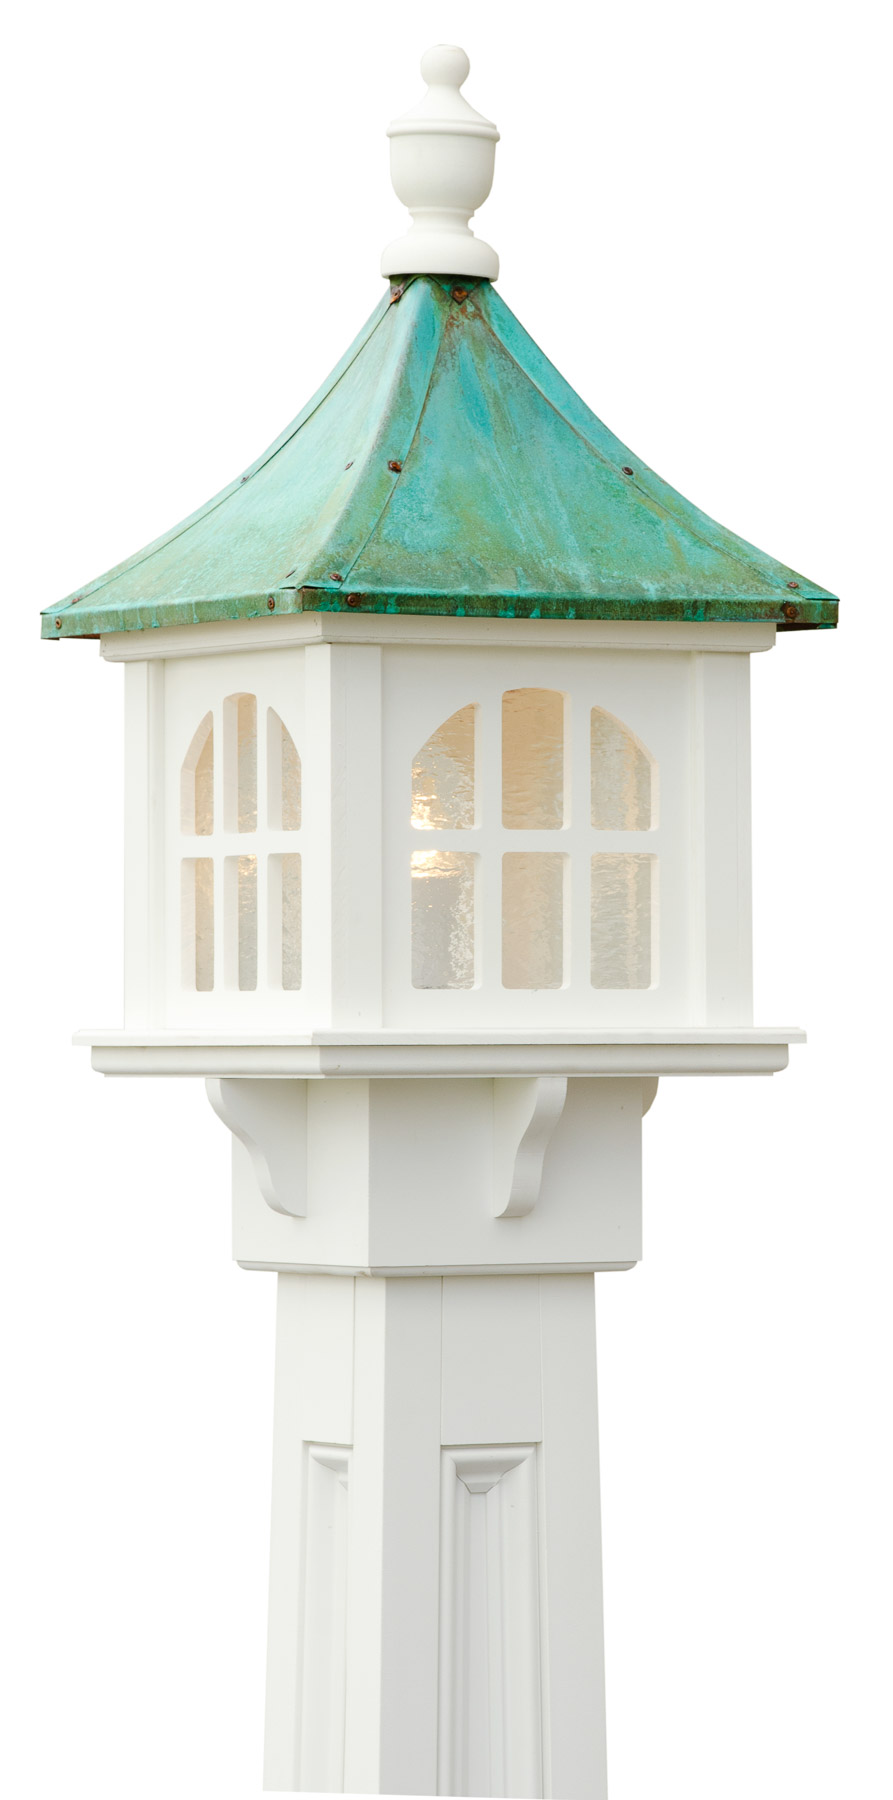 Lantern - Weymouth Lantern With Weathered Copper Roof